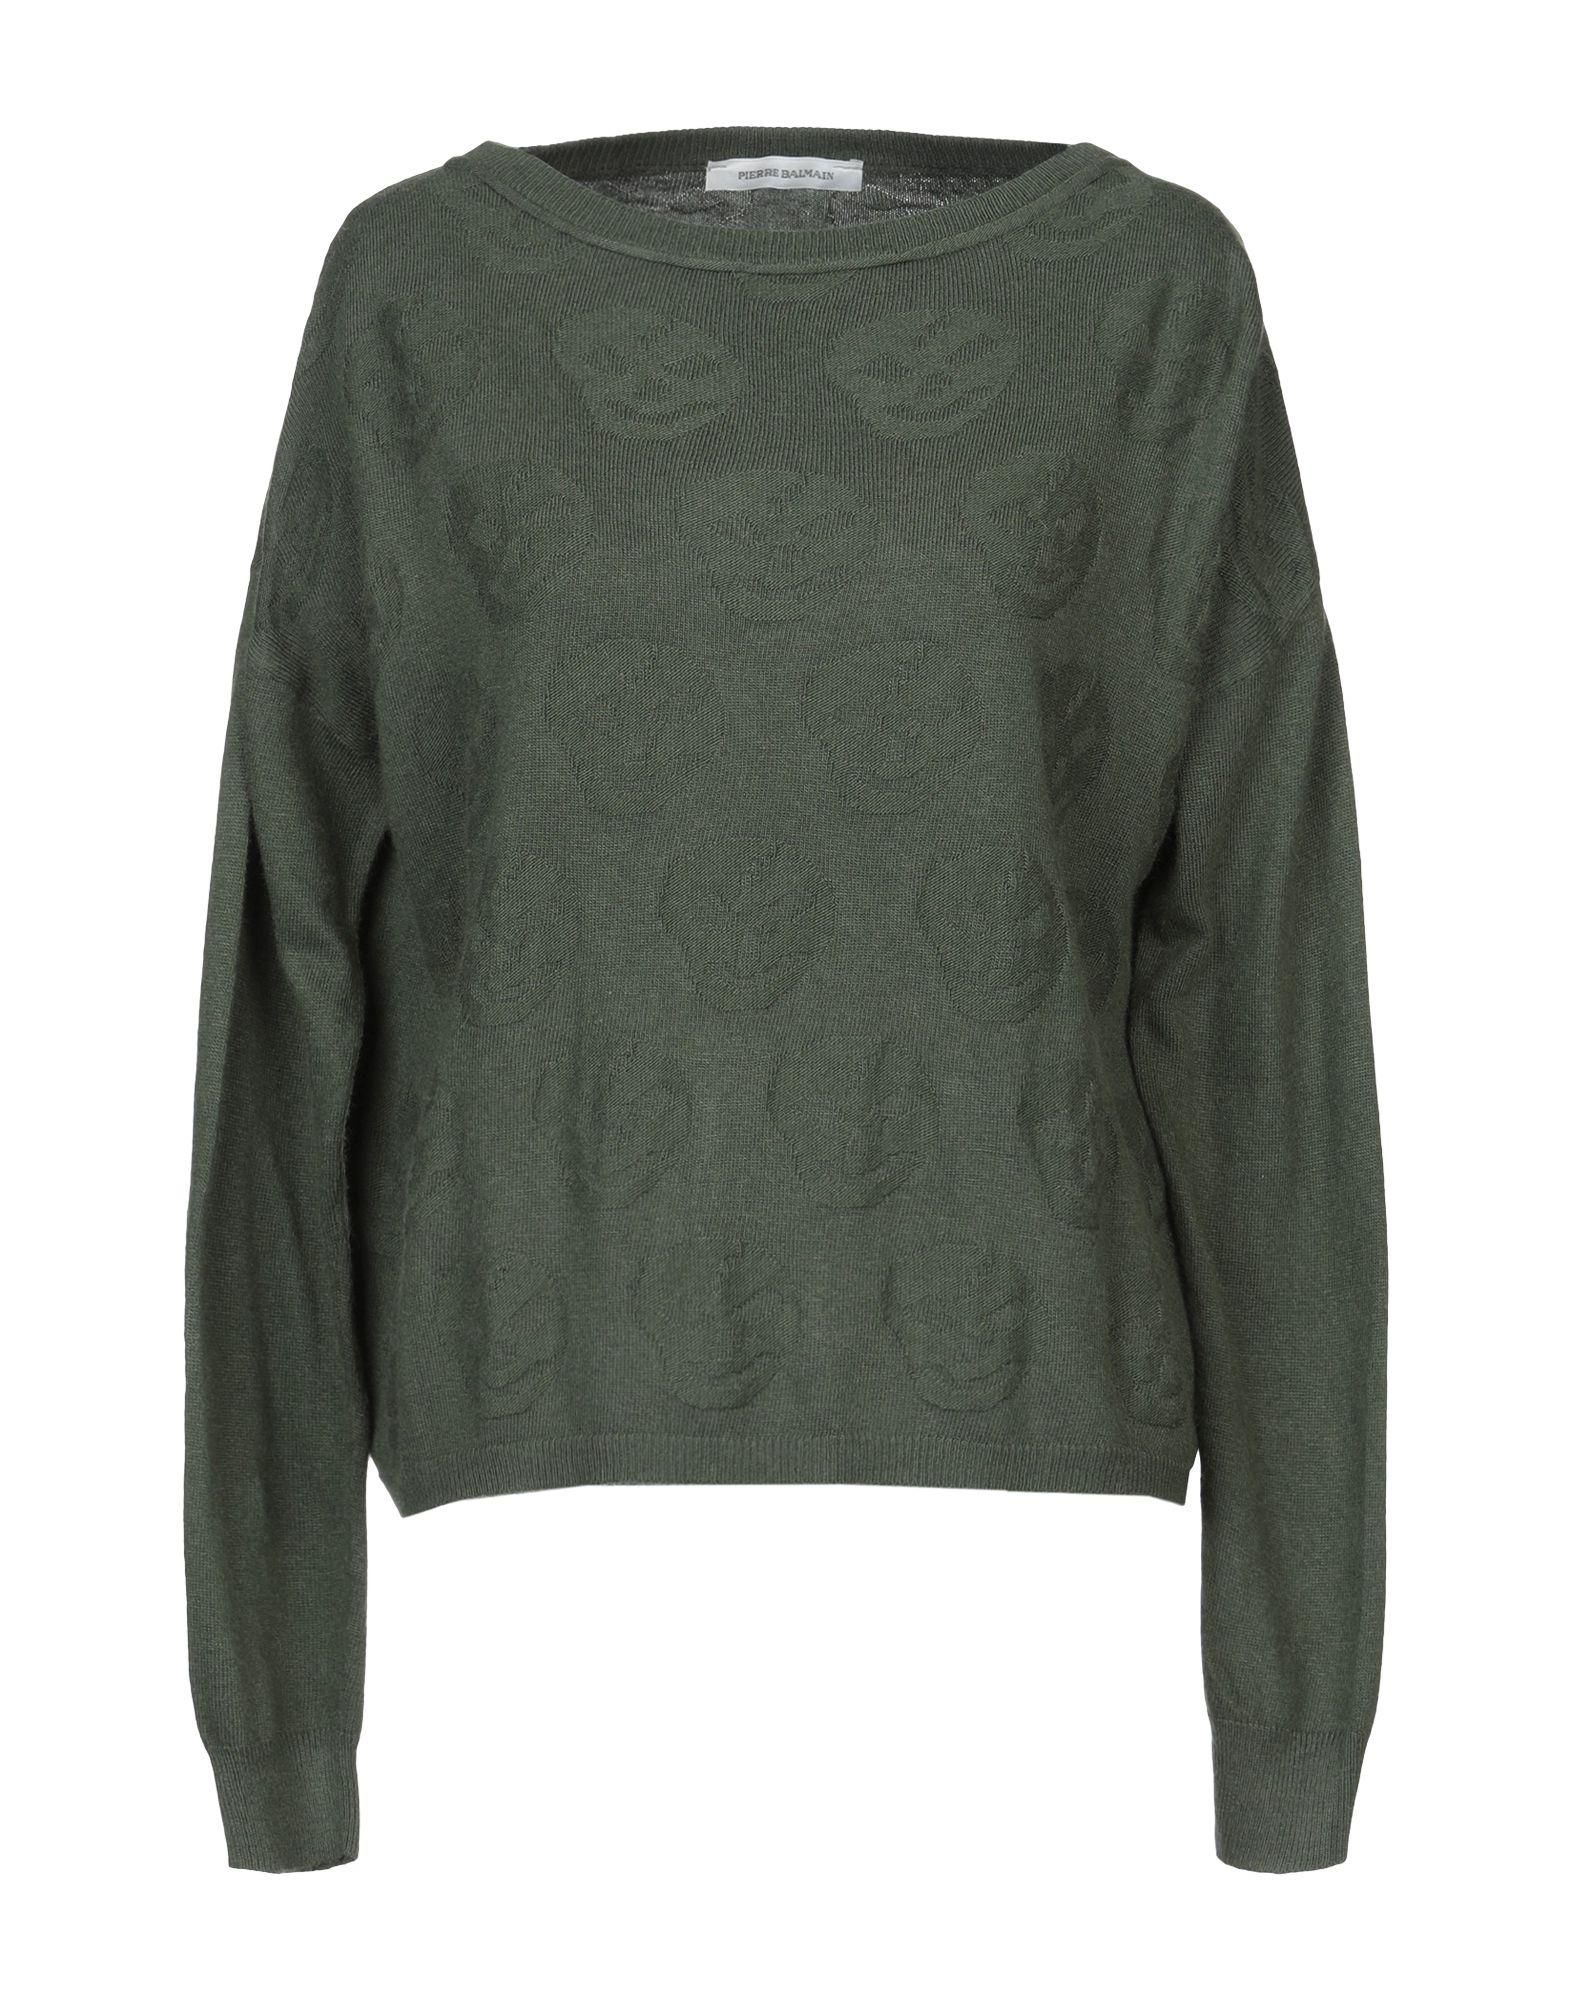 Balmain Synthetic Jumper in Military Green (Green) - Lyst